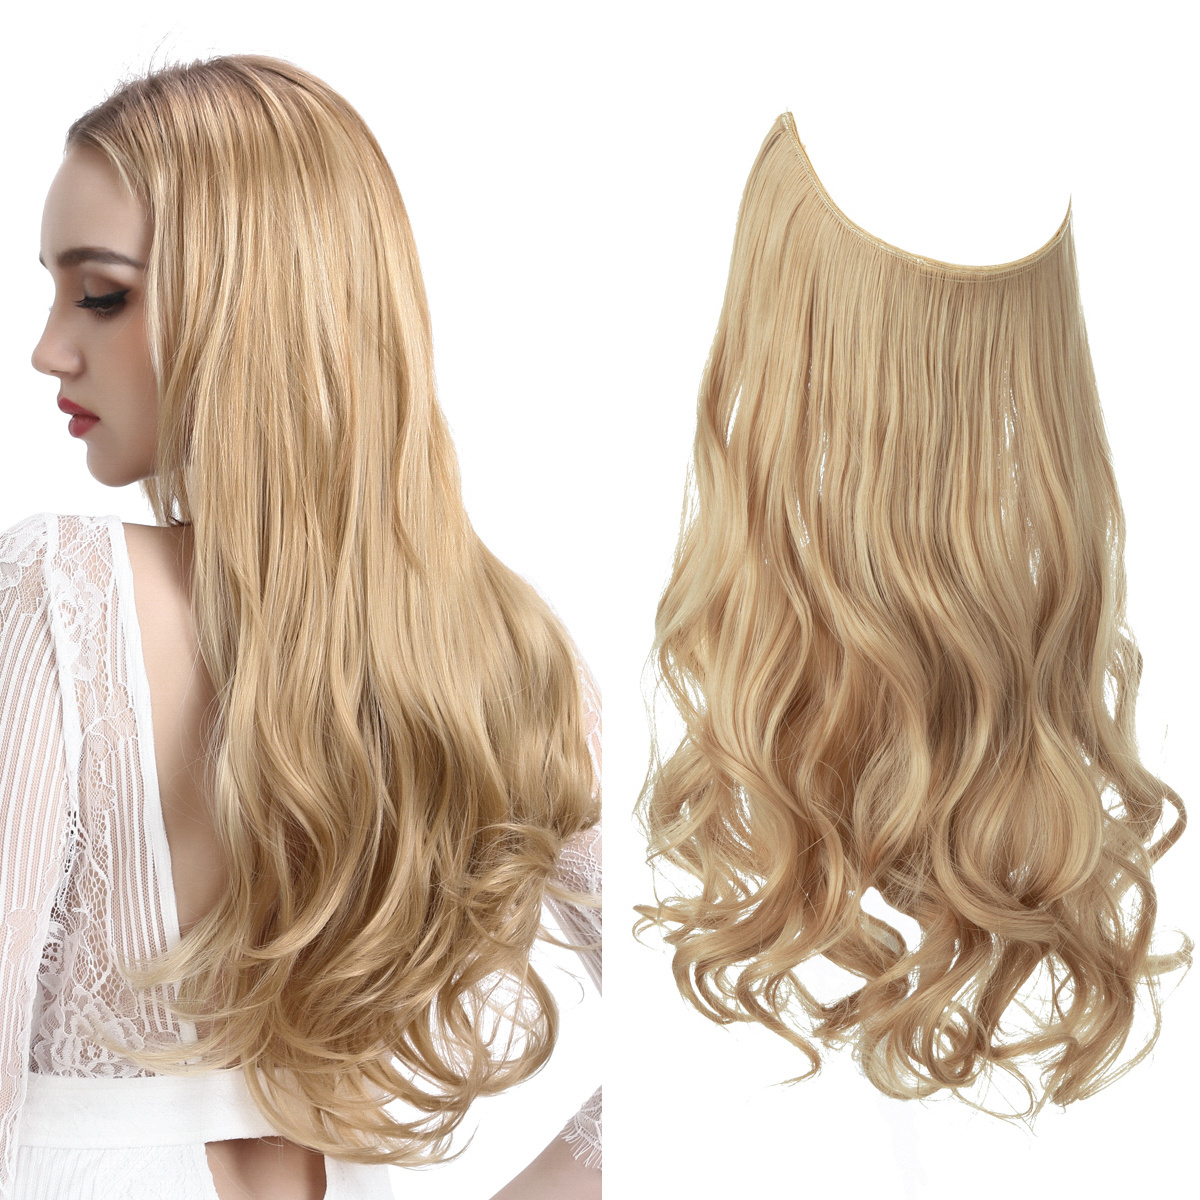 Sarla Dirty Blonde Hair Extension Halo Highlight Wavy Curly Long Synthetic Hairpieces for Women 18 inch 4.2 oz Adjustable Size H